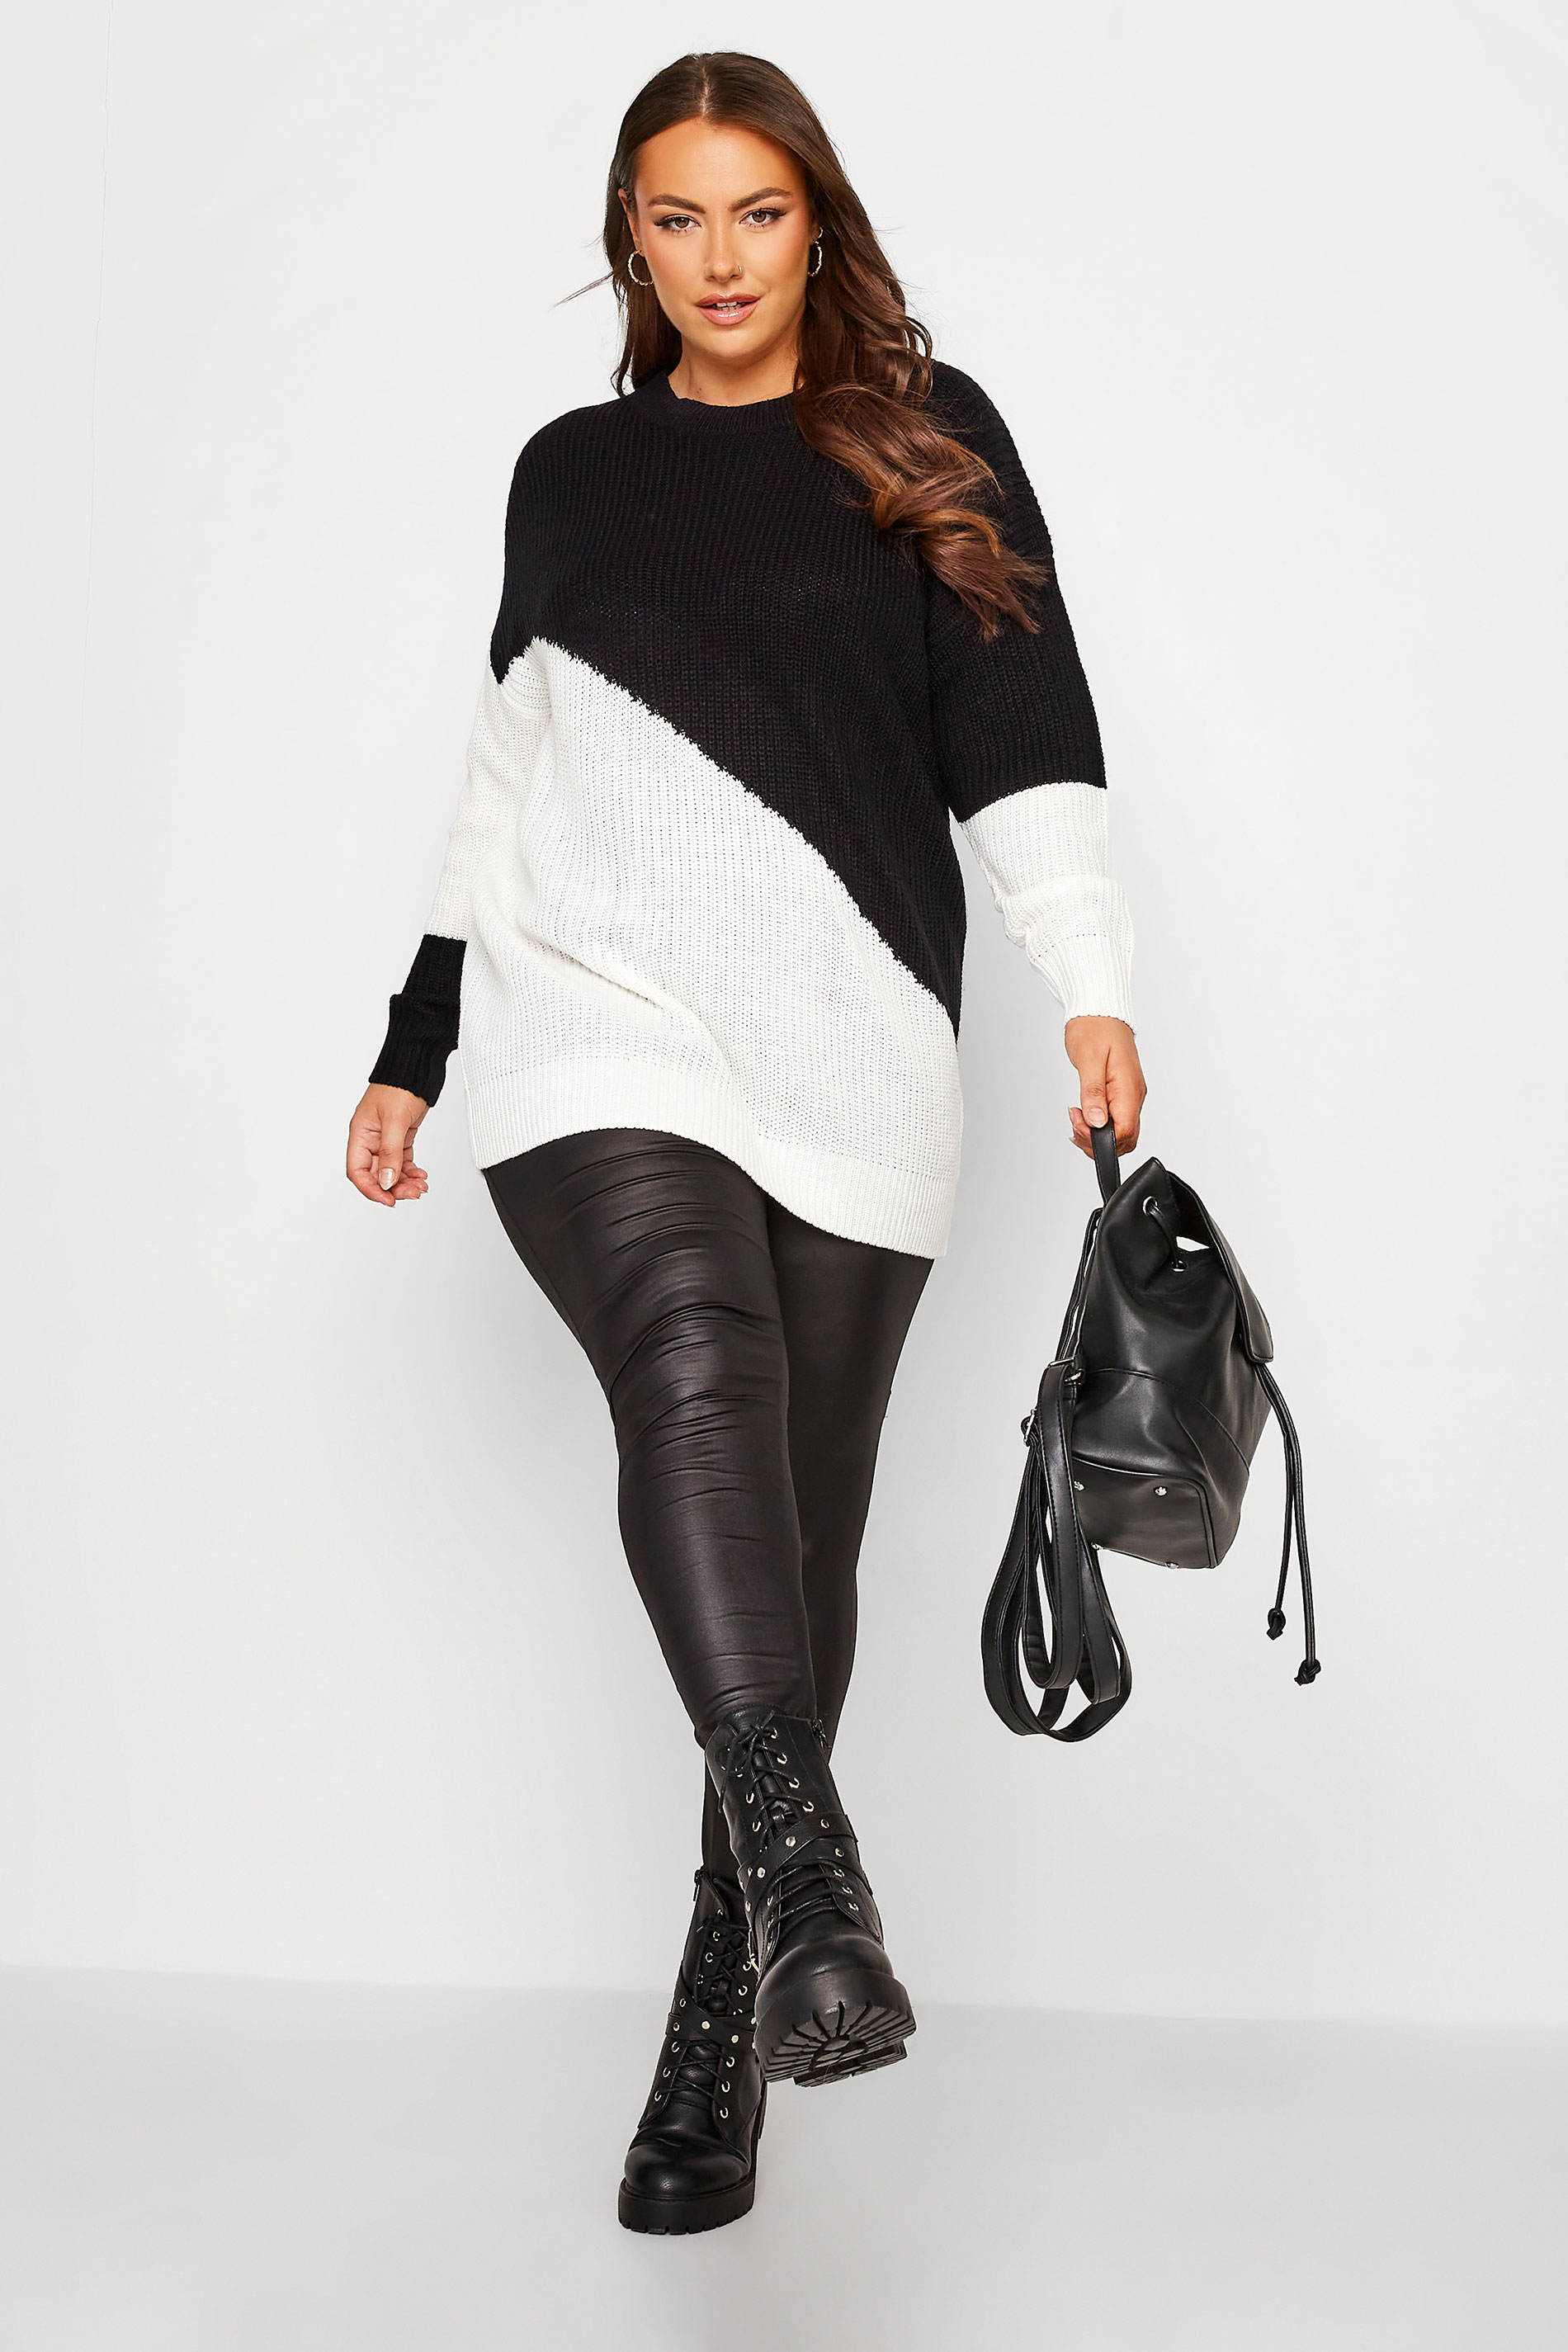 Plus Size Black & White Stripe Knitted Jumper | Yours Clothing 2